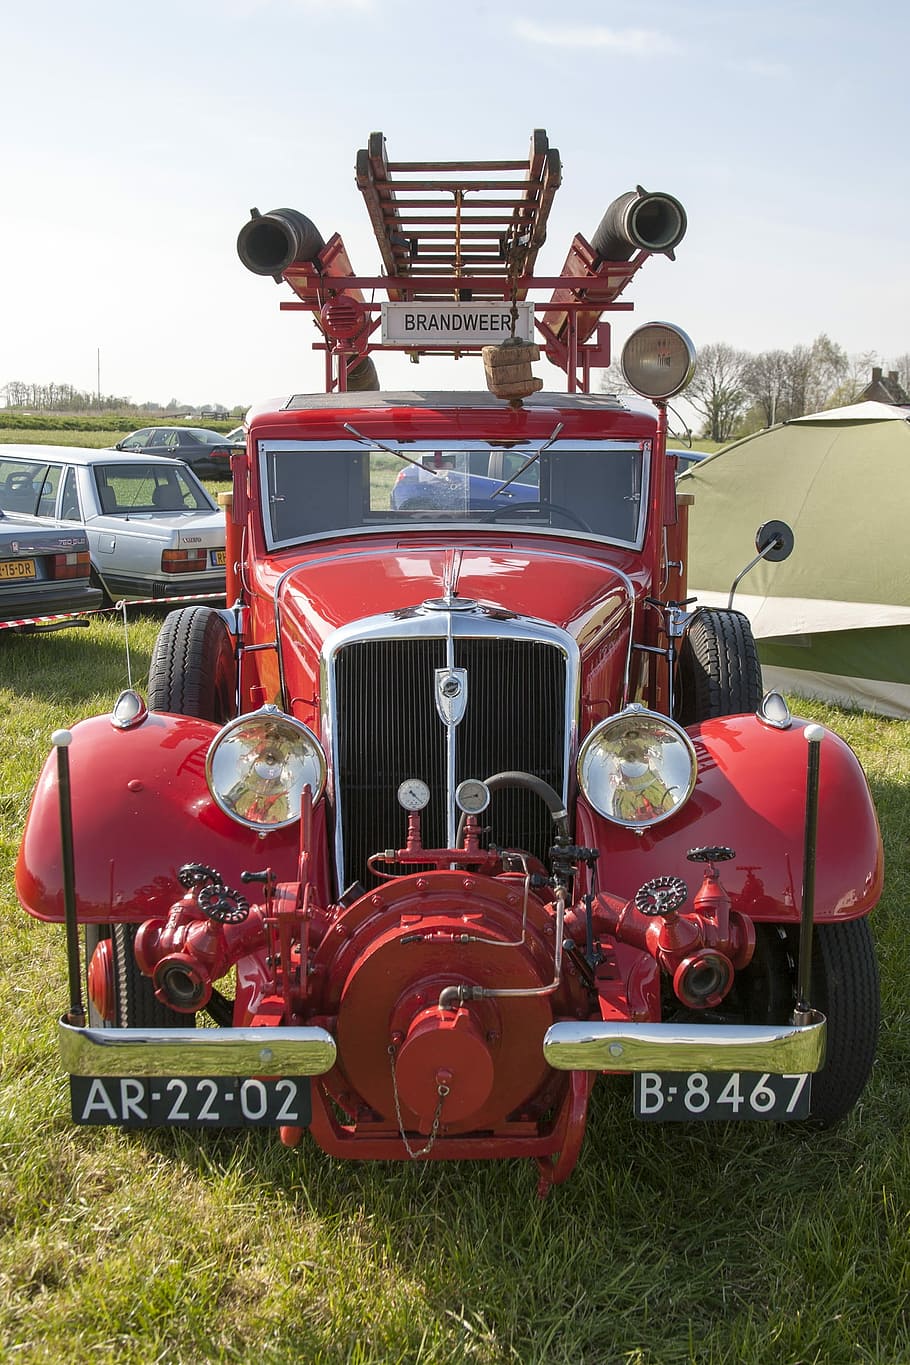 Oldtimer, Auto, Fire Truck, fire, red, old, vintage car automobile, classic, turntable ladder, old-fashioned